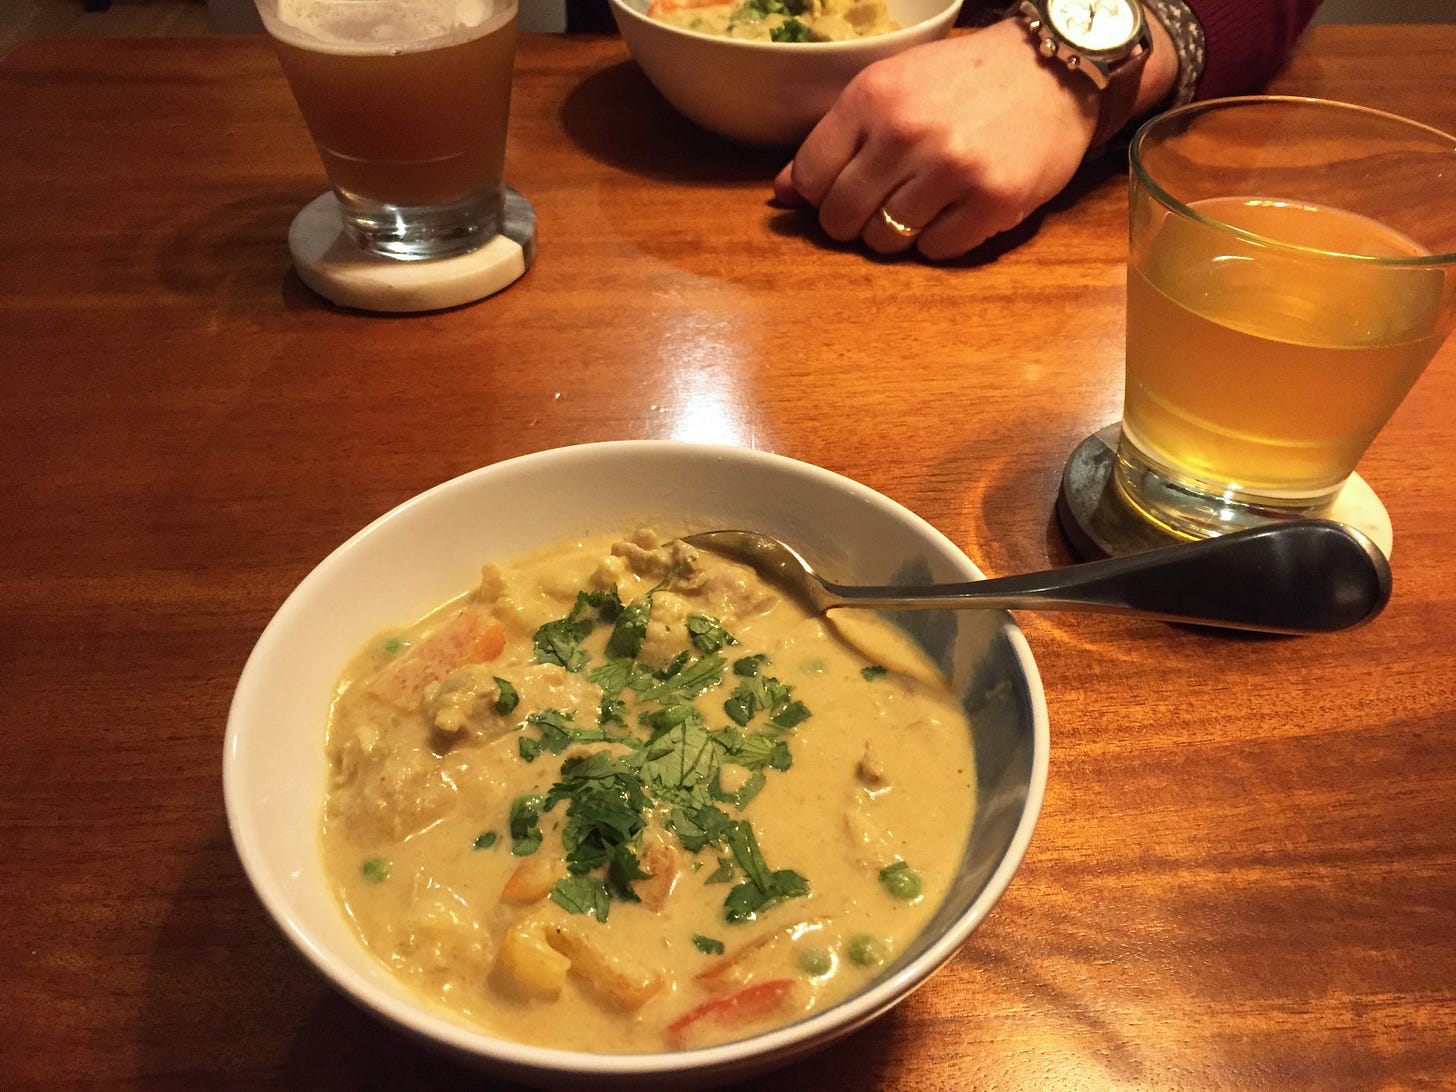 A white bowl full of curry, topped with chopped cilantro. A glass of beer sits on a coaster next to the bowl, and Jeff's hand is visible next to his bowl on the other side of the table.